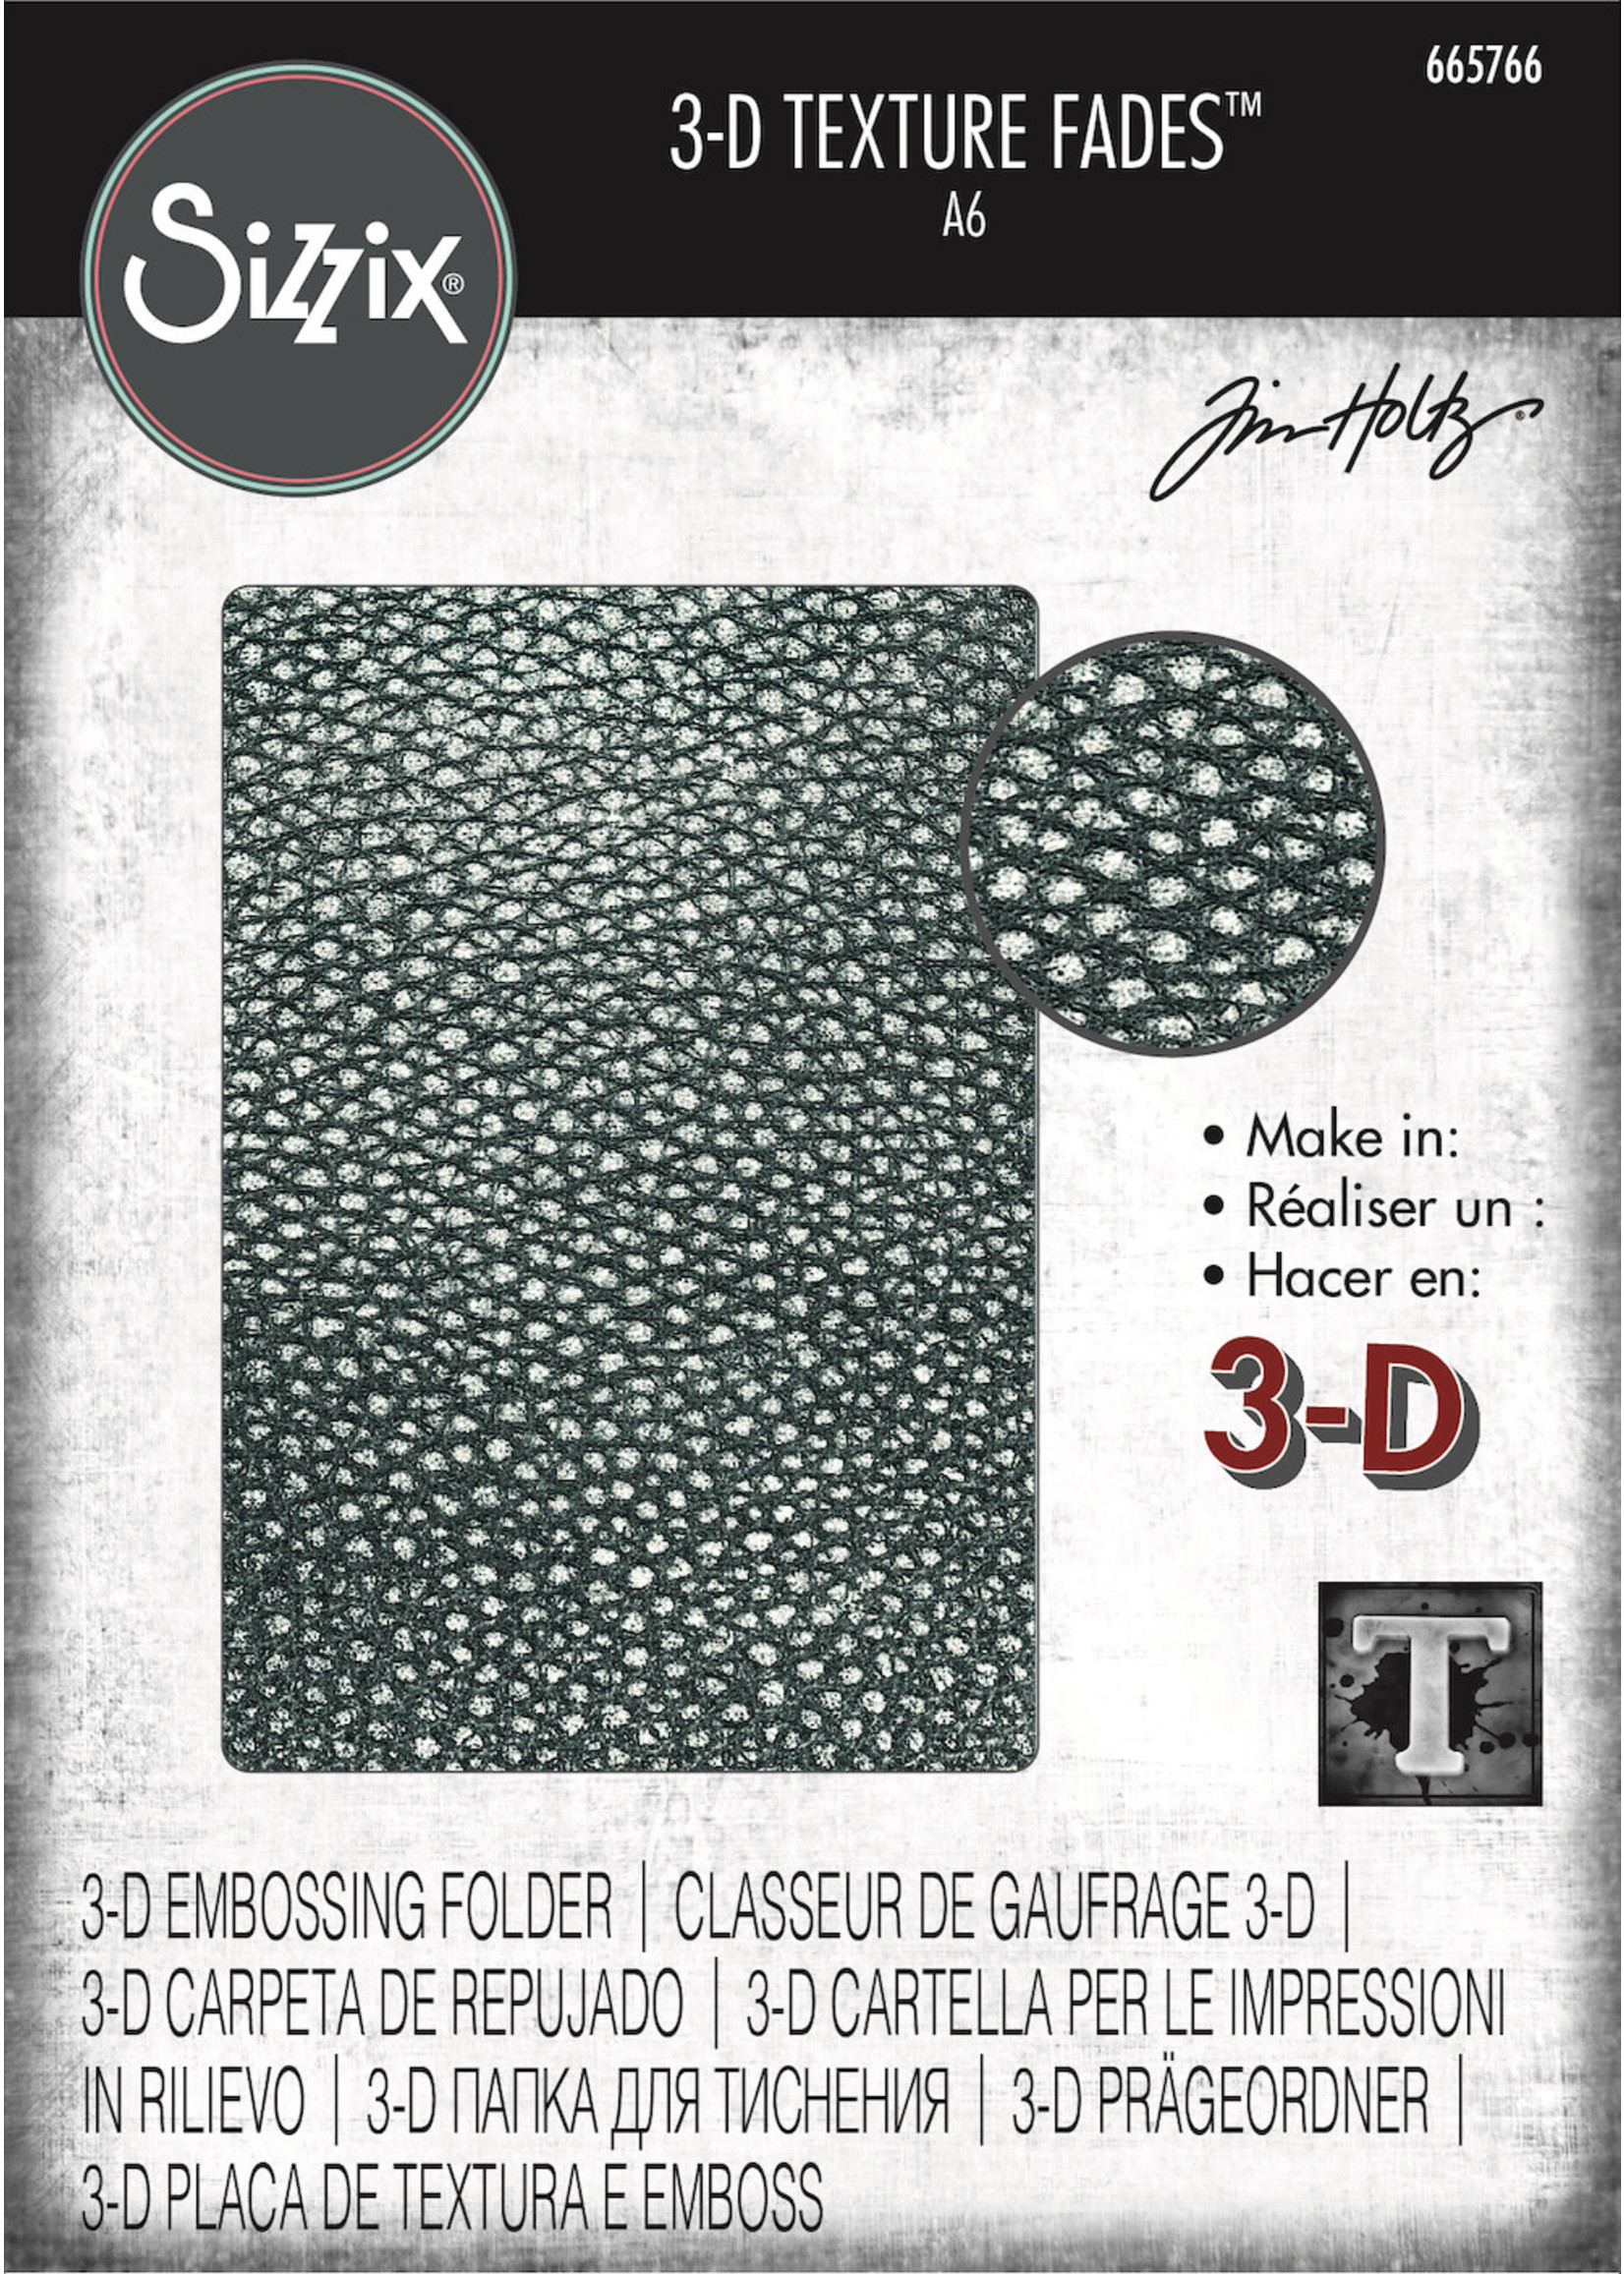 Sizzix Cracked Leather 3-D Texture Fades™ Embossing Folder